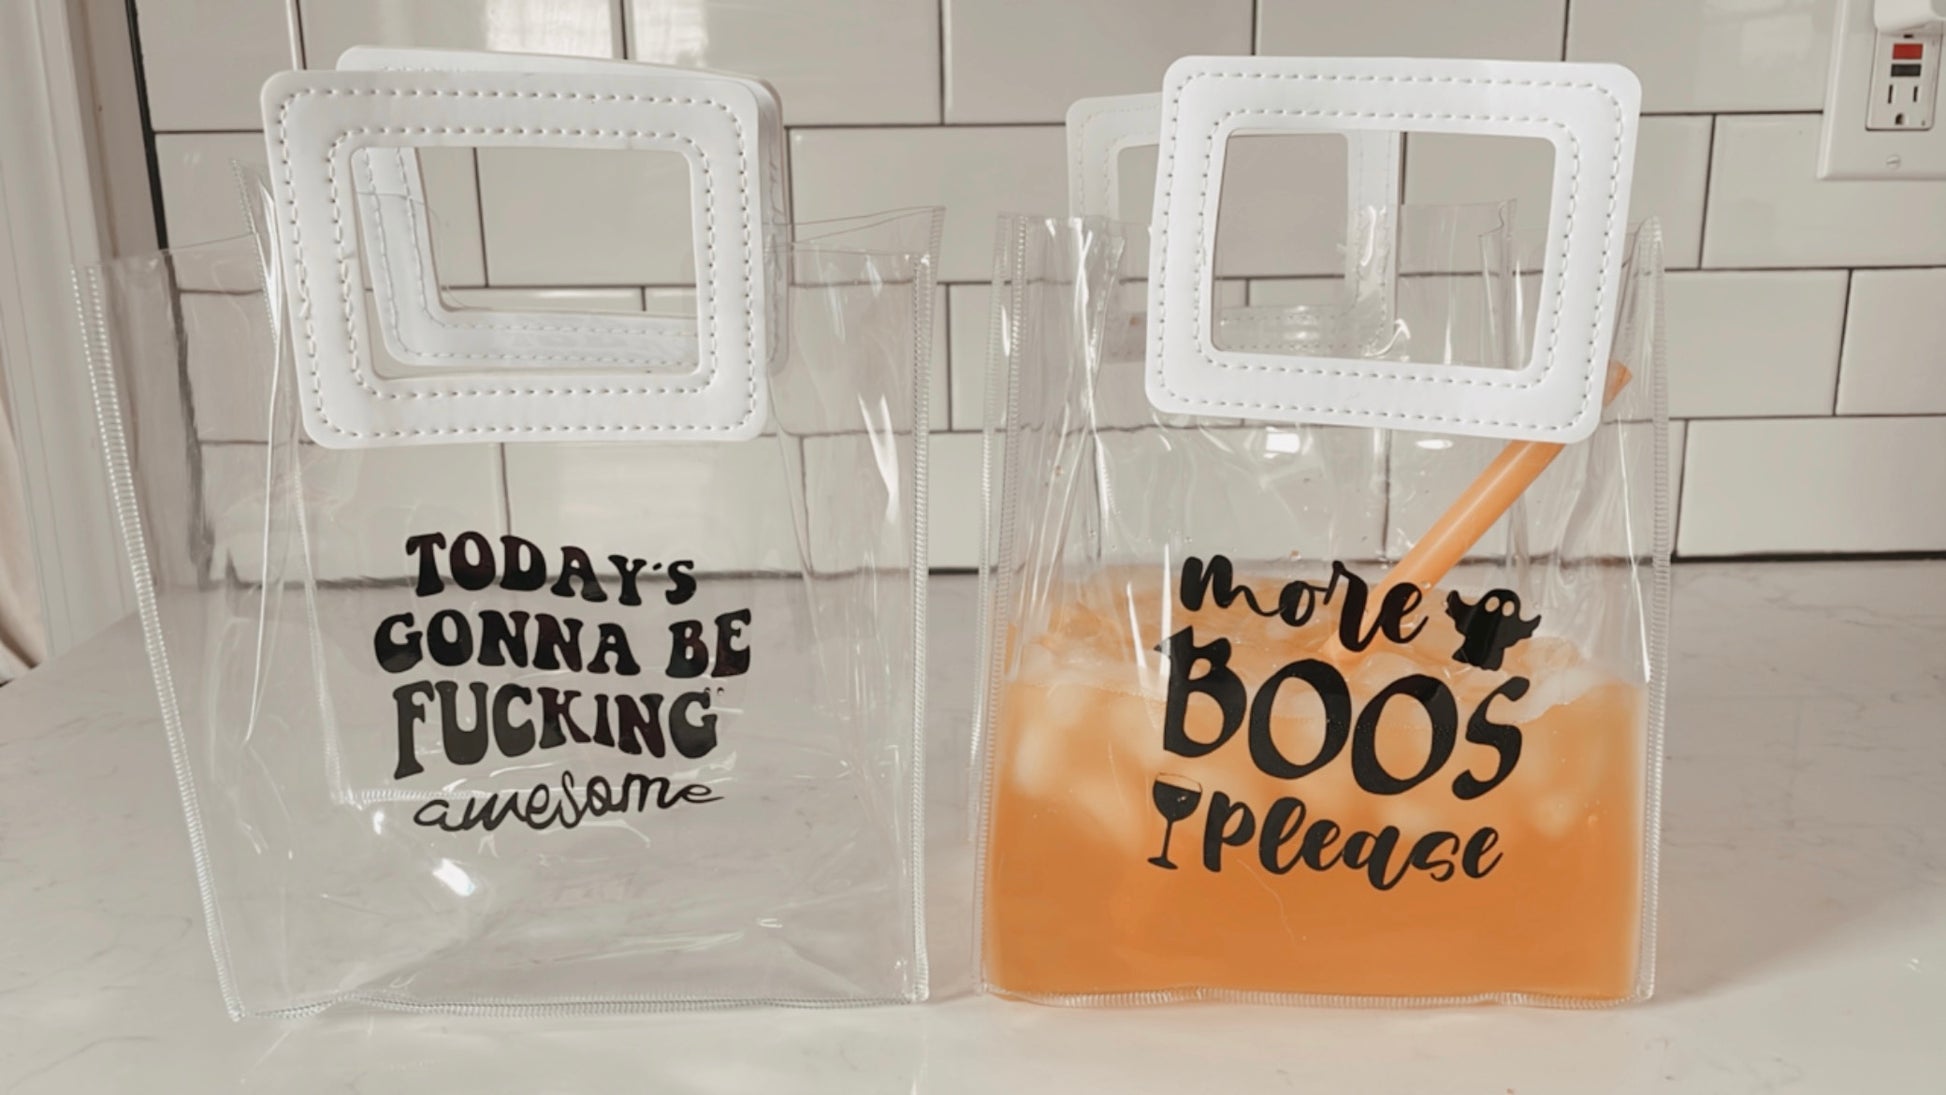 Halloween Drink Bags – Bailey's Branches